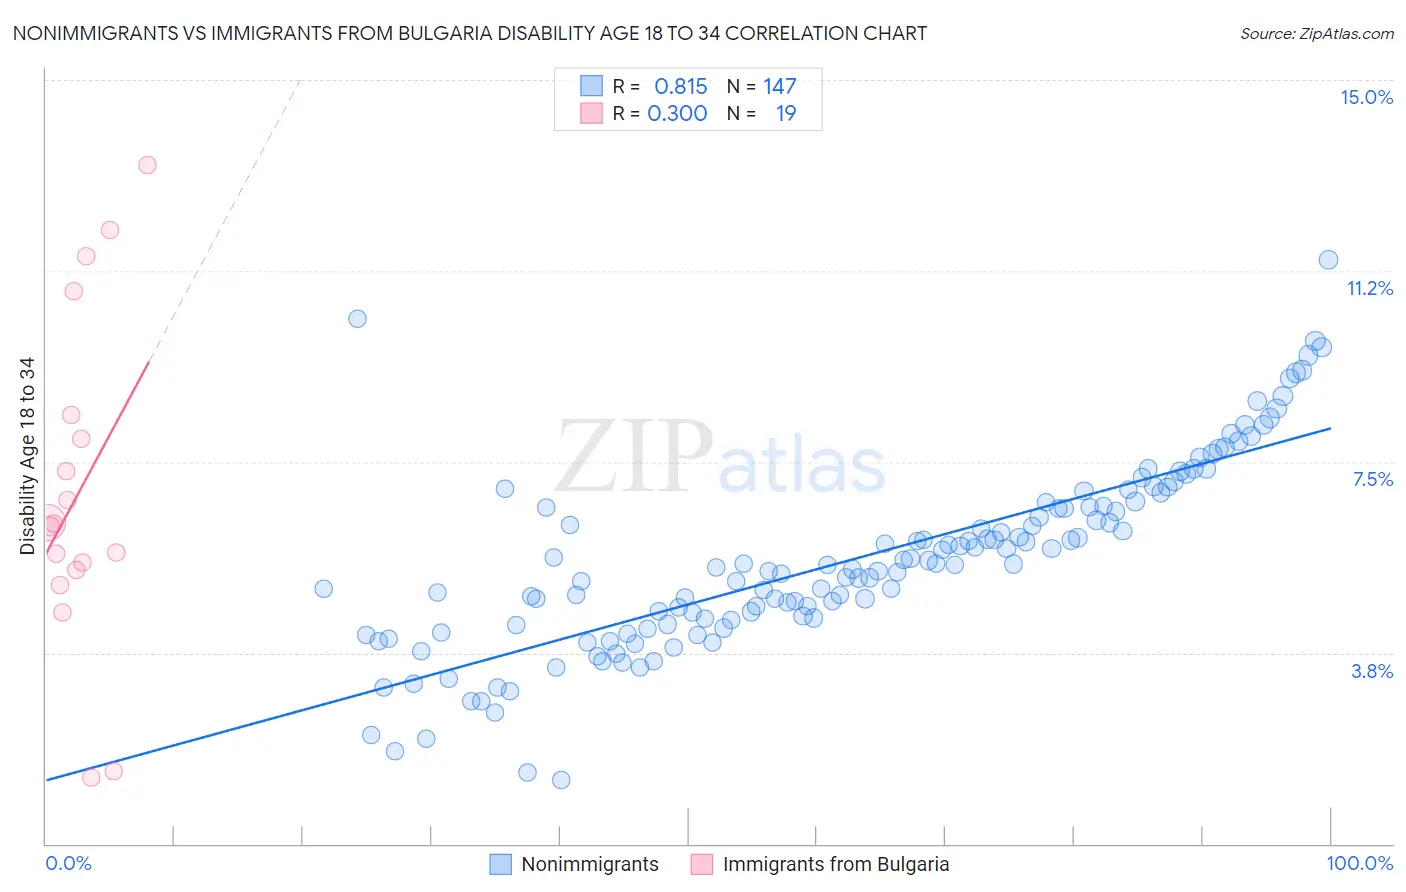 Nonimmigrants vs Immigrants from Bulgaria Disability Age 18 to 34